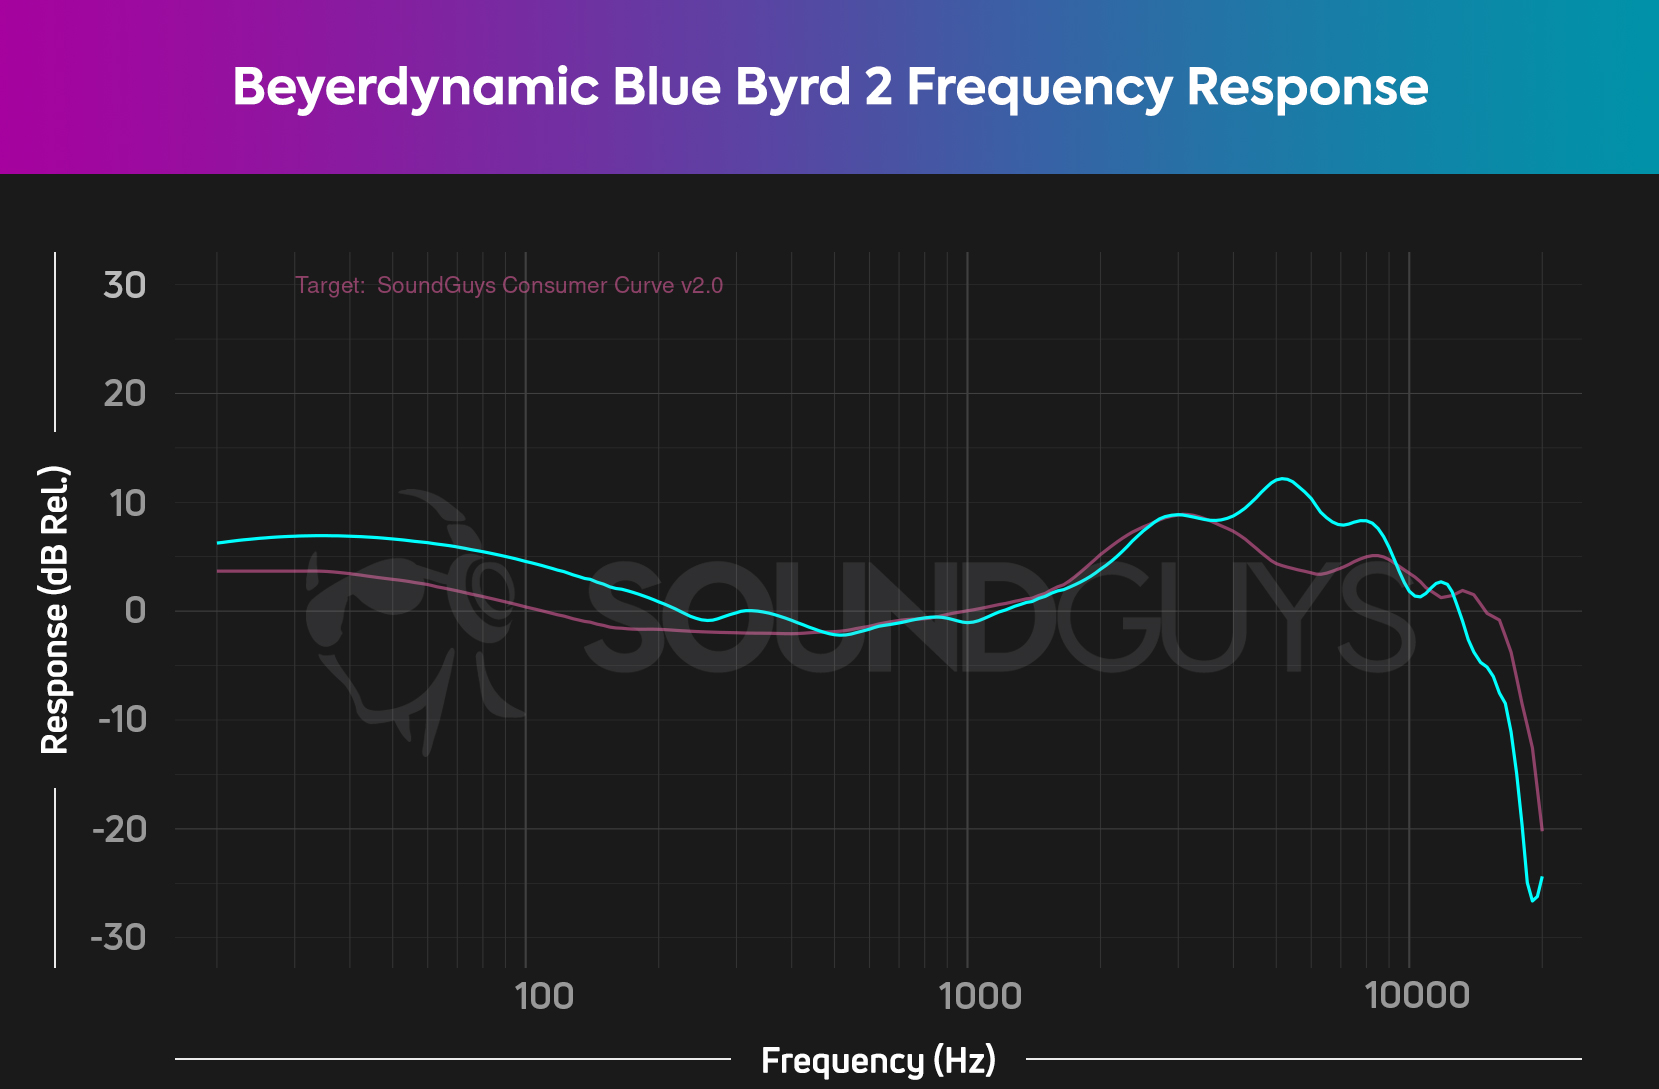 The frequency response chart for the beyerdynamic Blue Byrd 2 showing that it boosts both the lows and highs above the target levels of the SoundGuys' house curve.